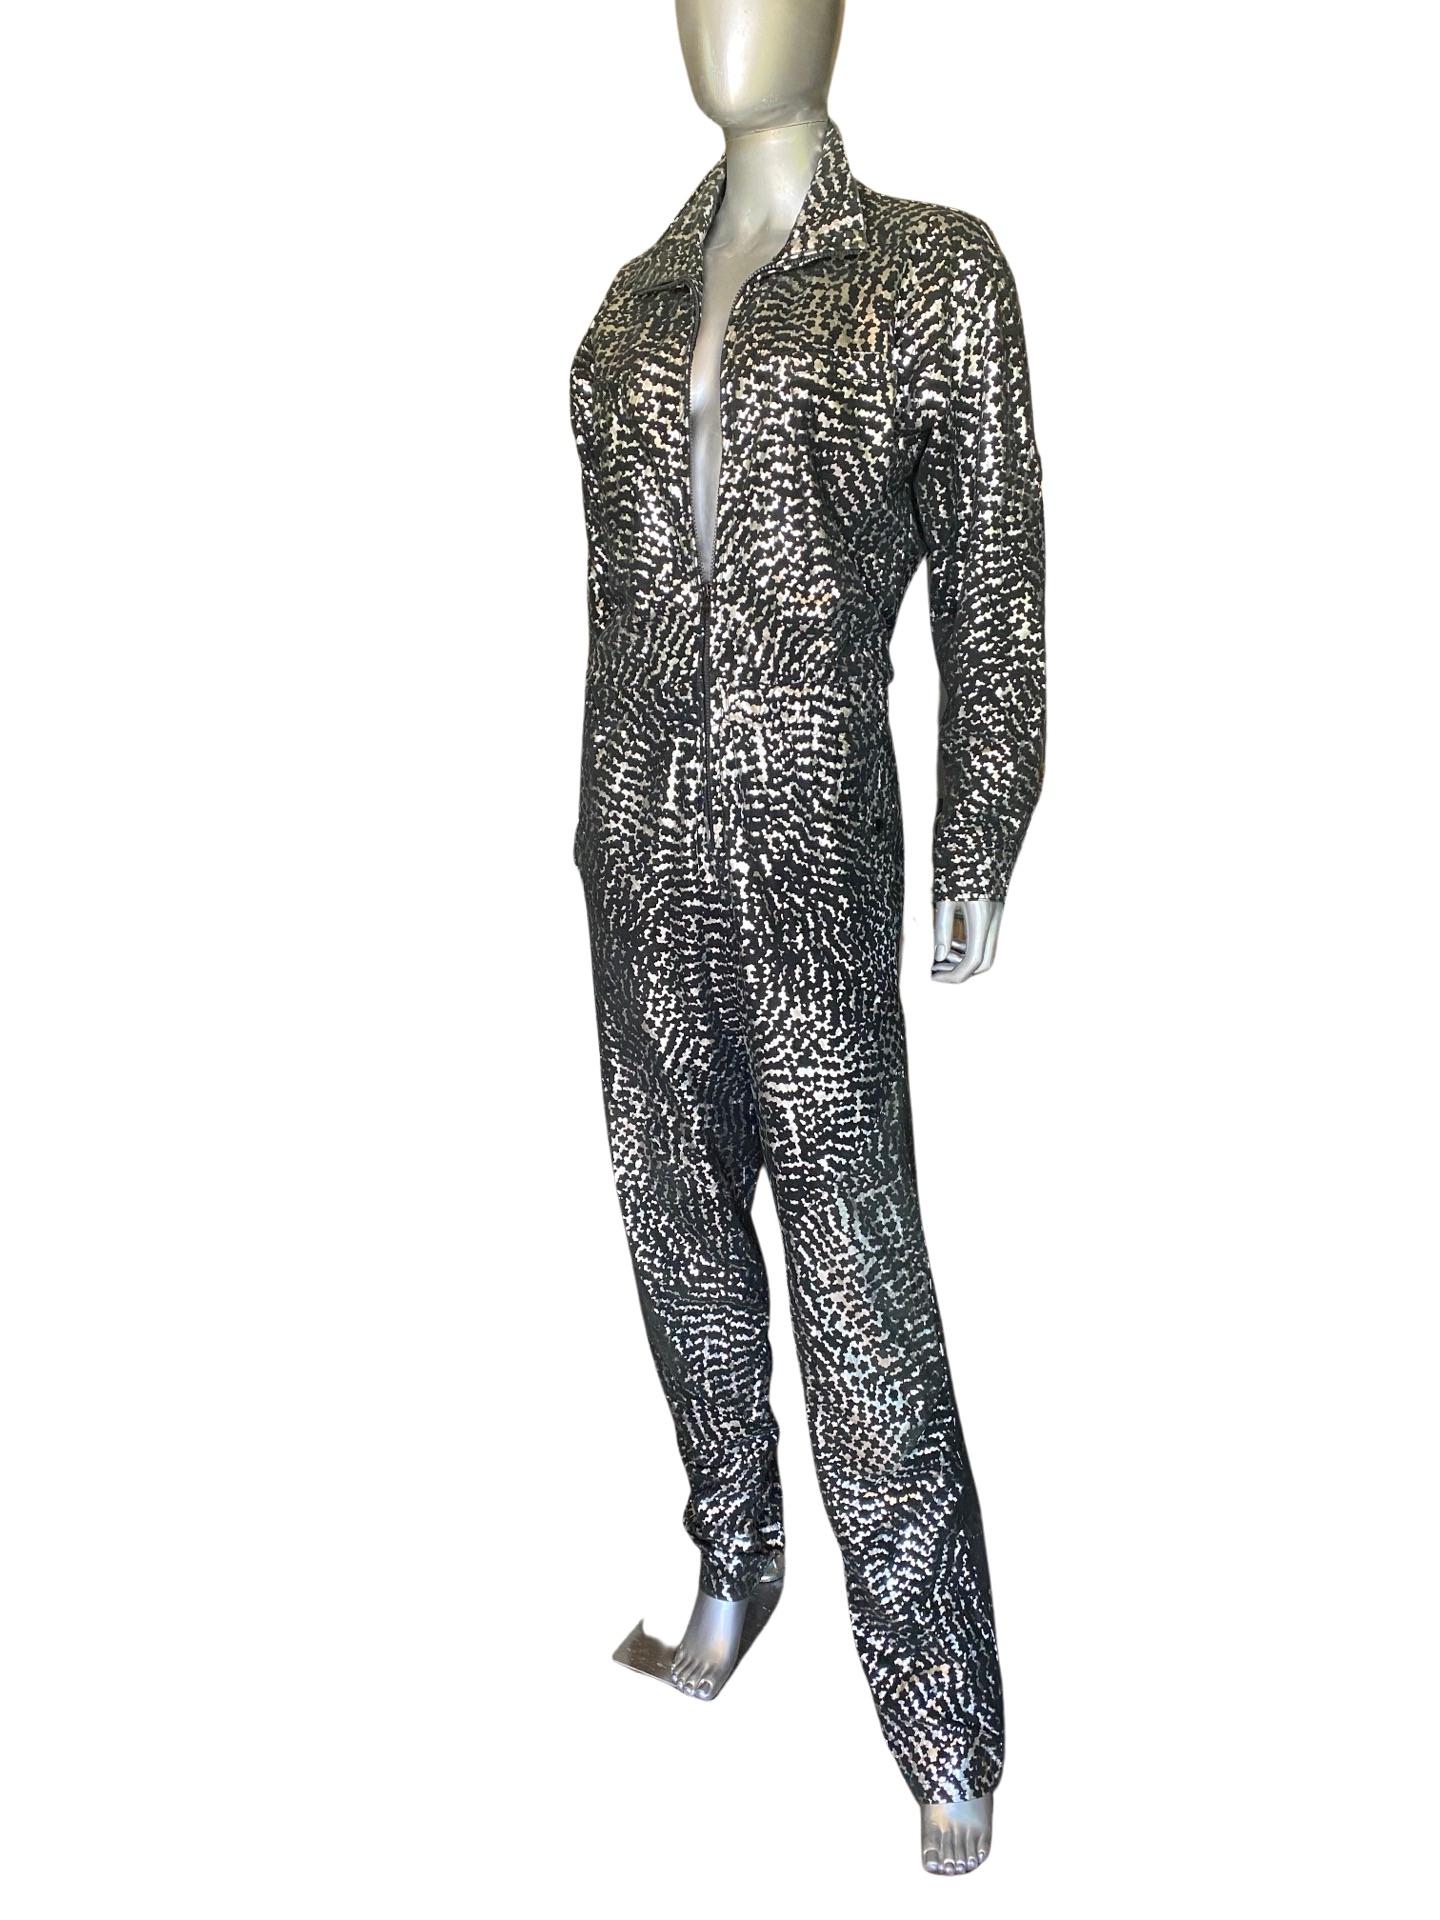 Vintage Italian Black Leather and Silver Metallic Glam Print Jumpsuit, Size 10 In Good Condition For Sale In Palm Springs, CA